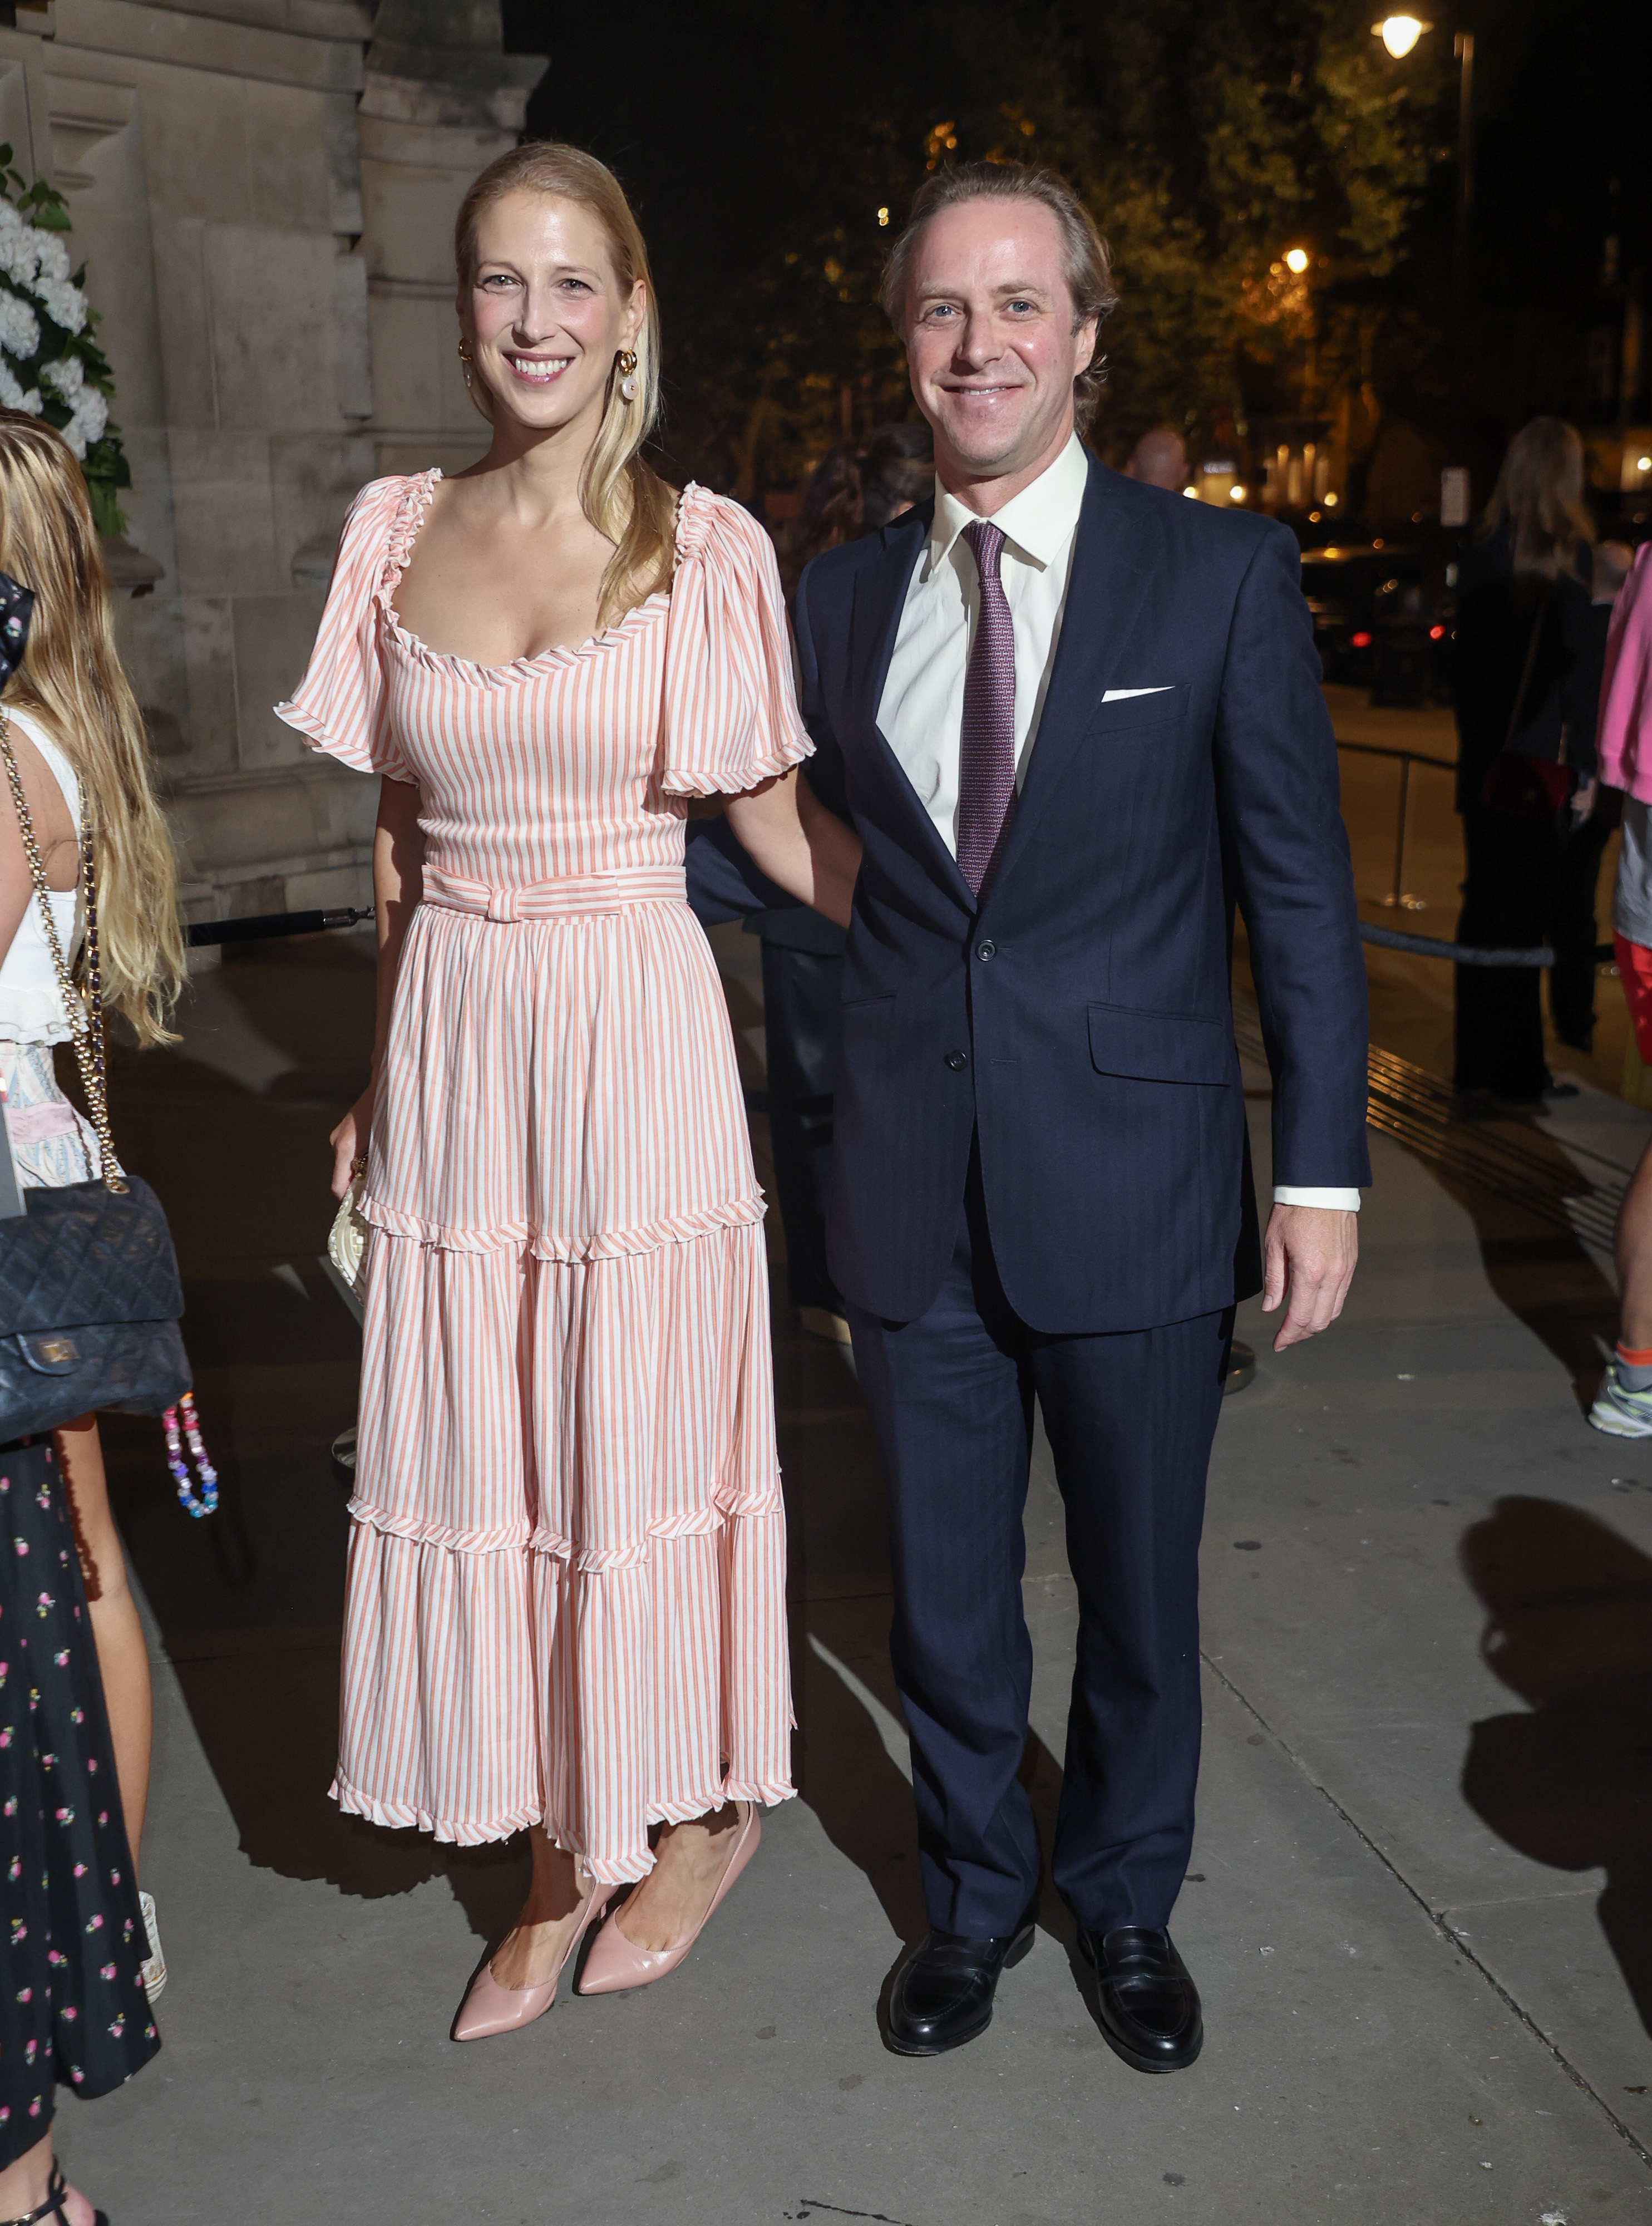 Lady Gabriella Kingston and Thomas Kingston at the private view of "Gabrielle Chanel. Fashion Manifesto" at The V&A on September 13, 2023 in London, England | Source: Getty Images